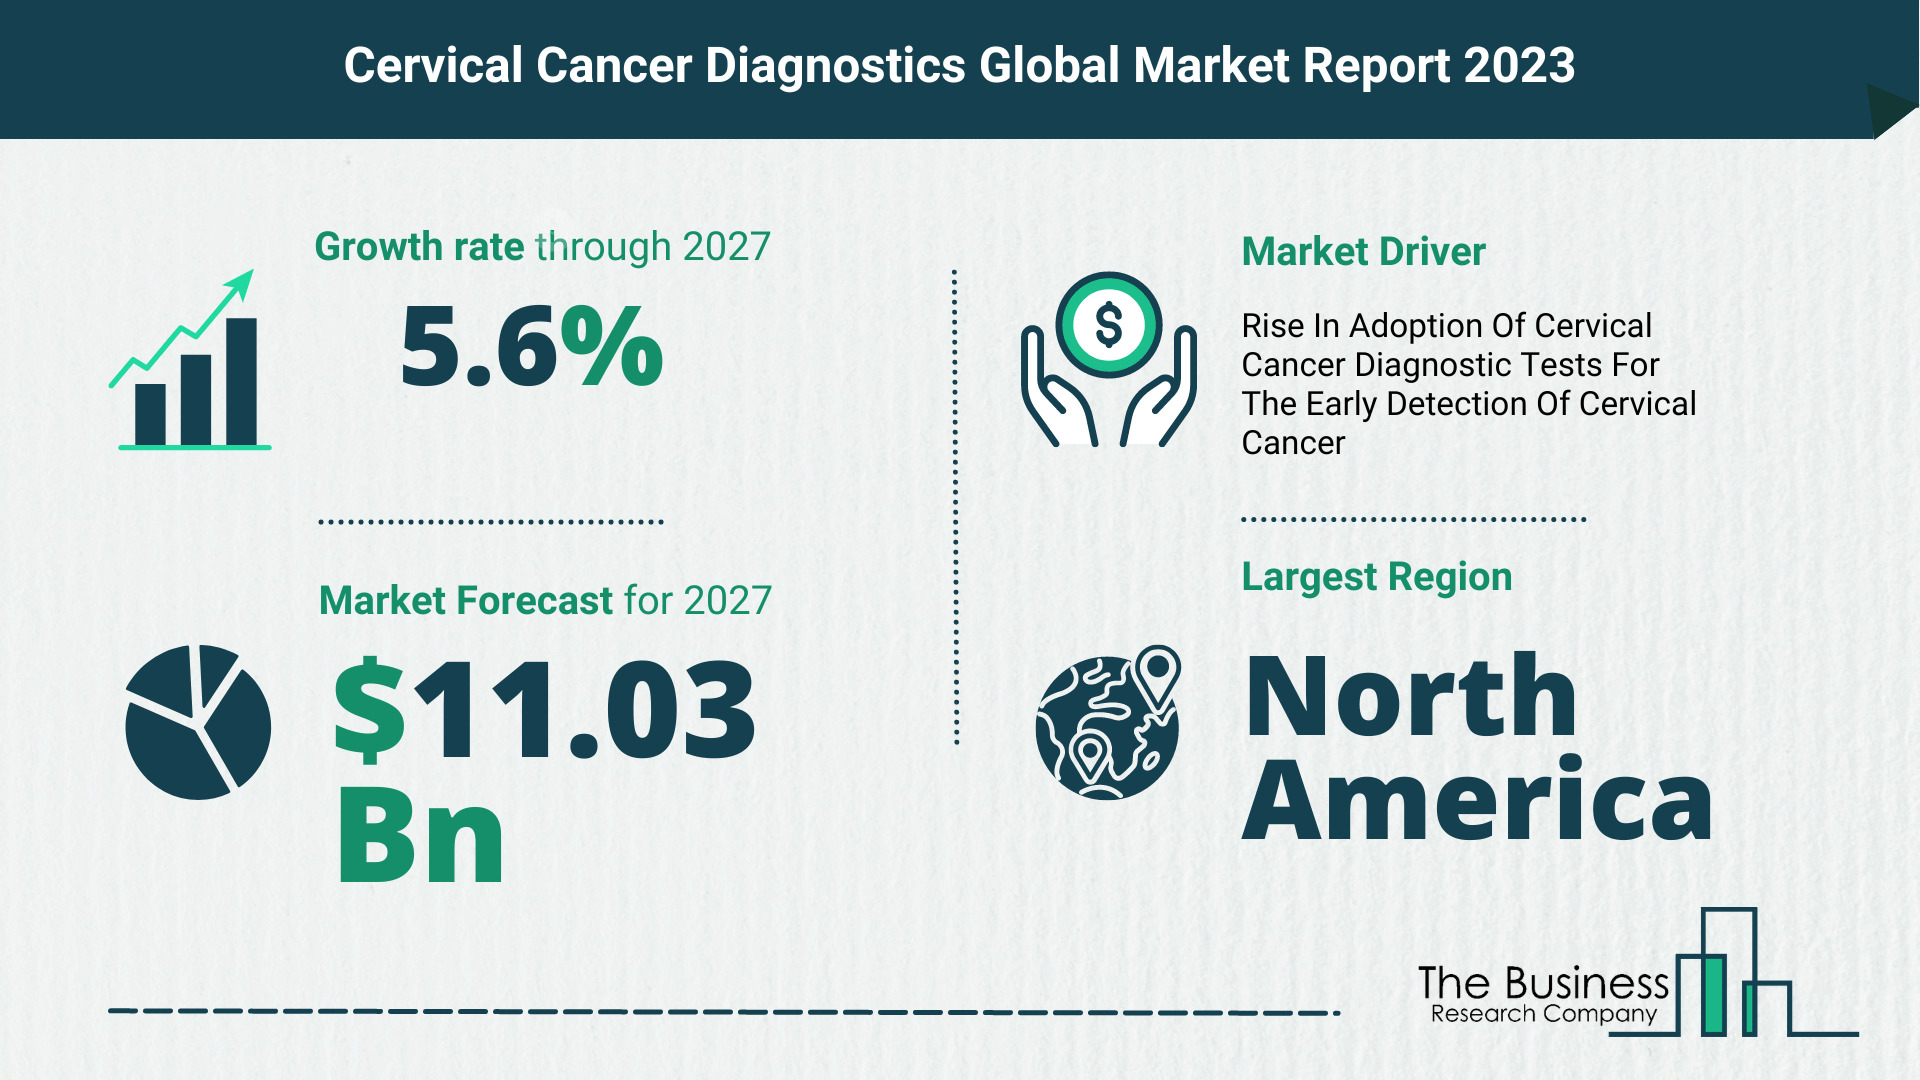 What Will The Cervical Cancer Diagnostics Market Look Like In 2023?